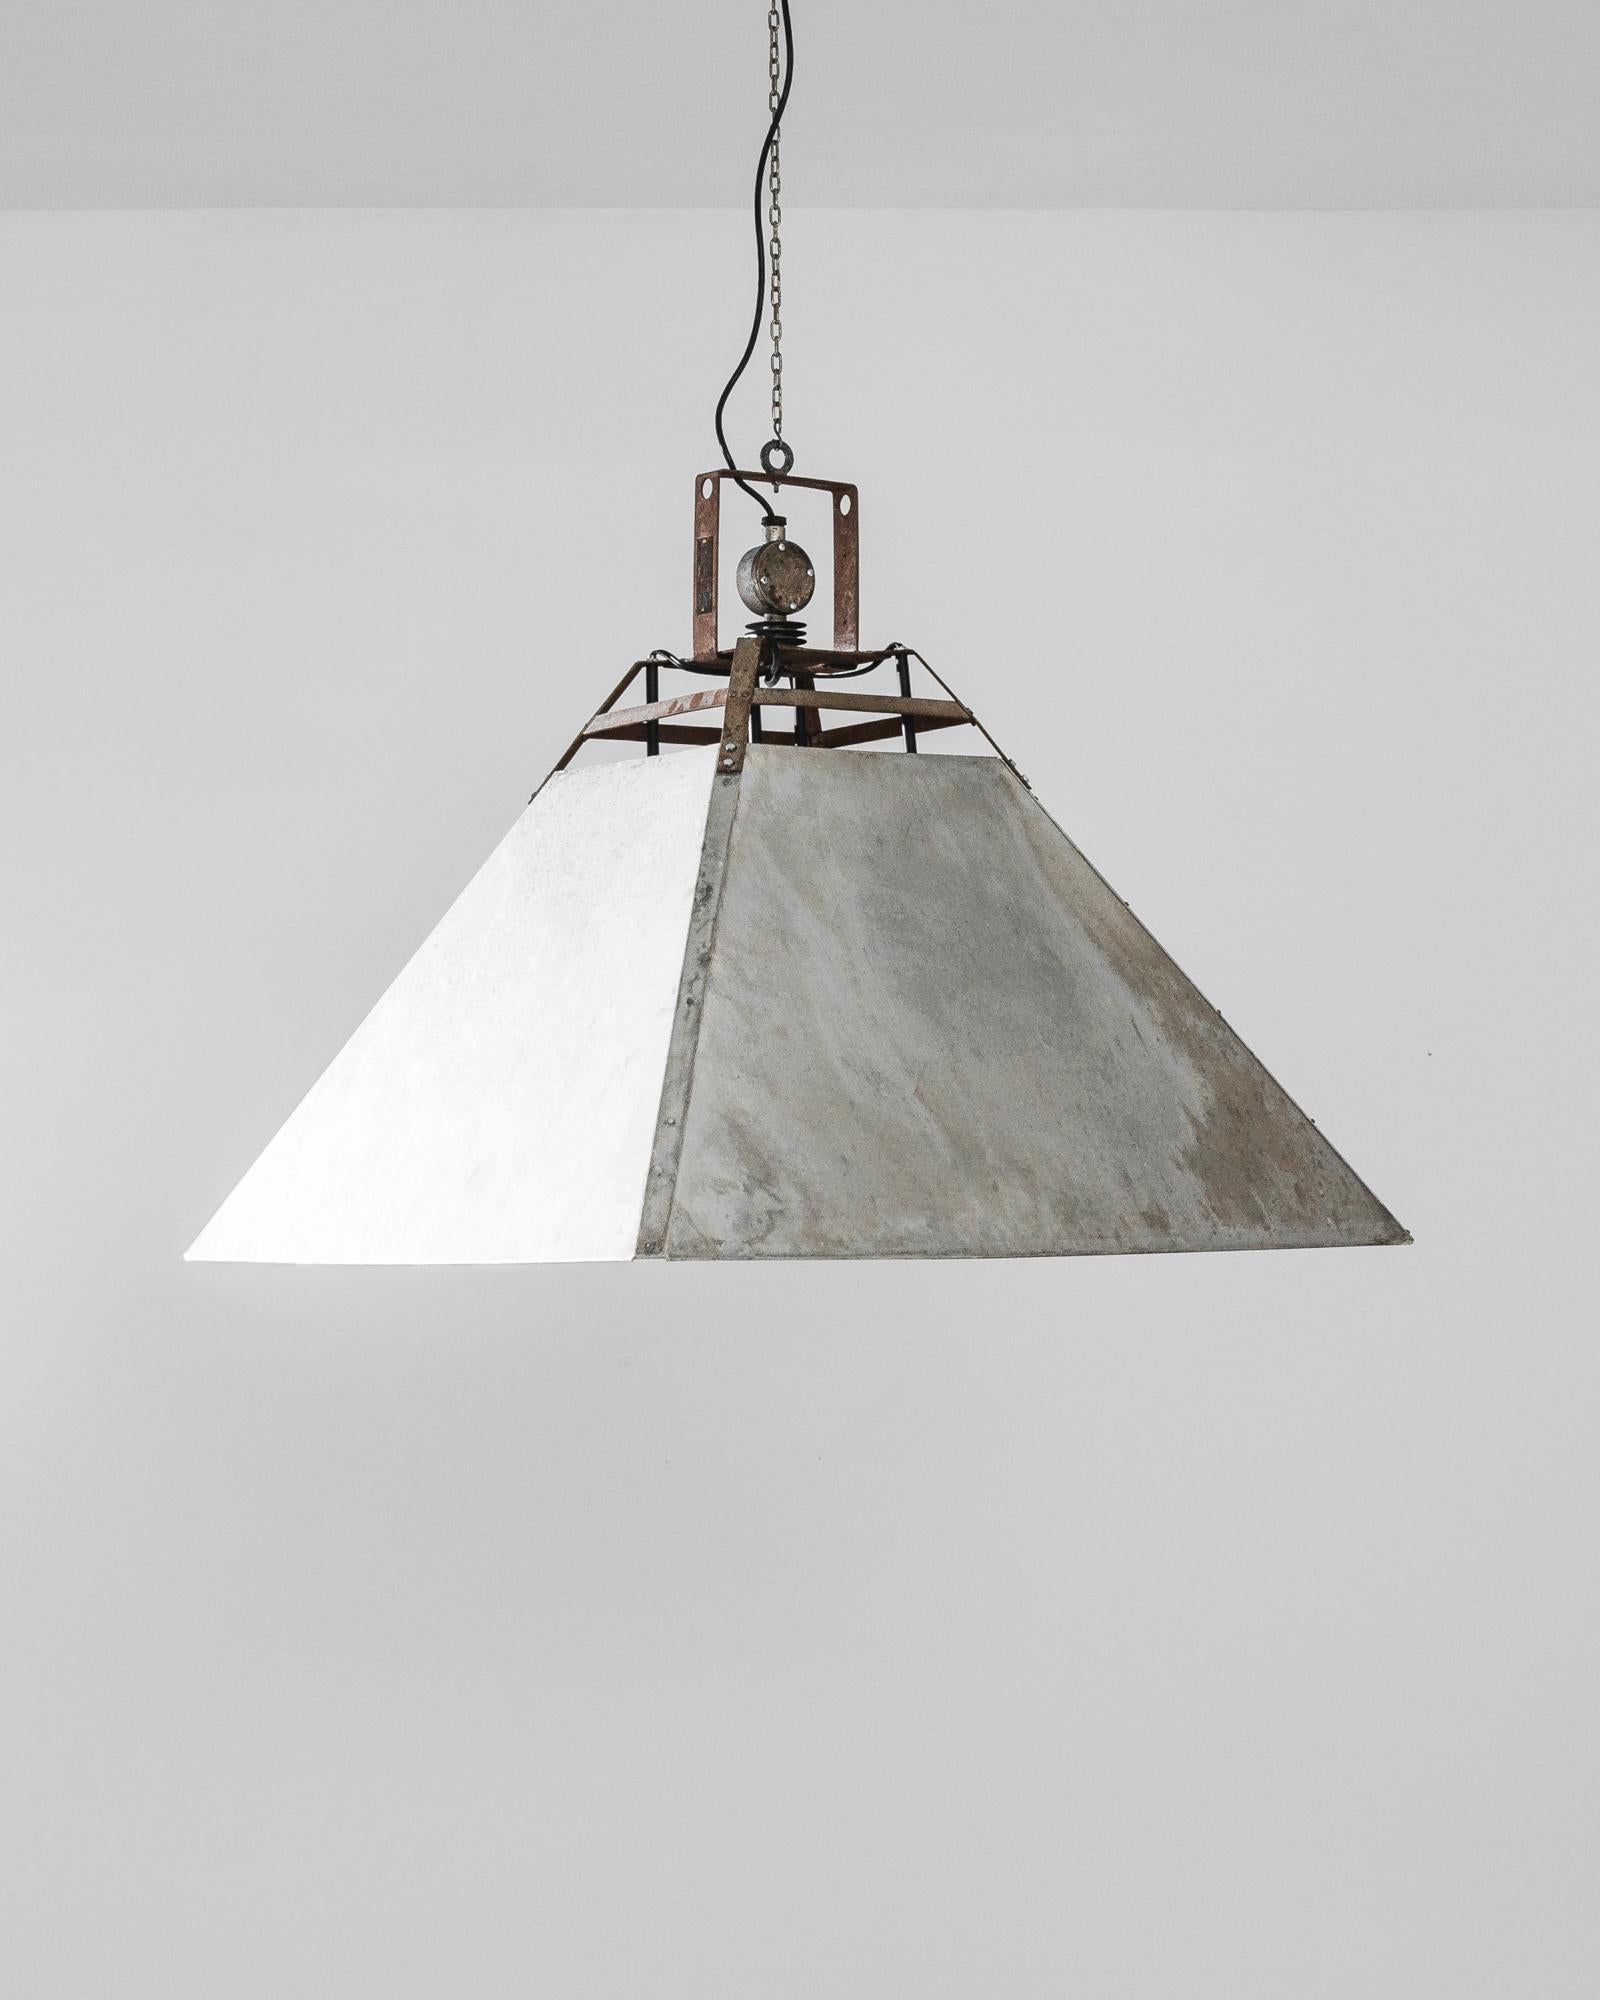 A metal lamp from Czechia, produced circa 1970. This industrial lamp has an angled, grey, metal four-wall shade suspended from the ceiling by a bracket with manufacturer’s nameplate and its original patina. A piece that calls to mind a Mid-Century